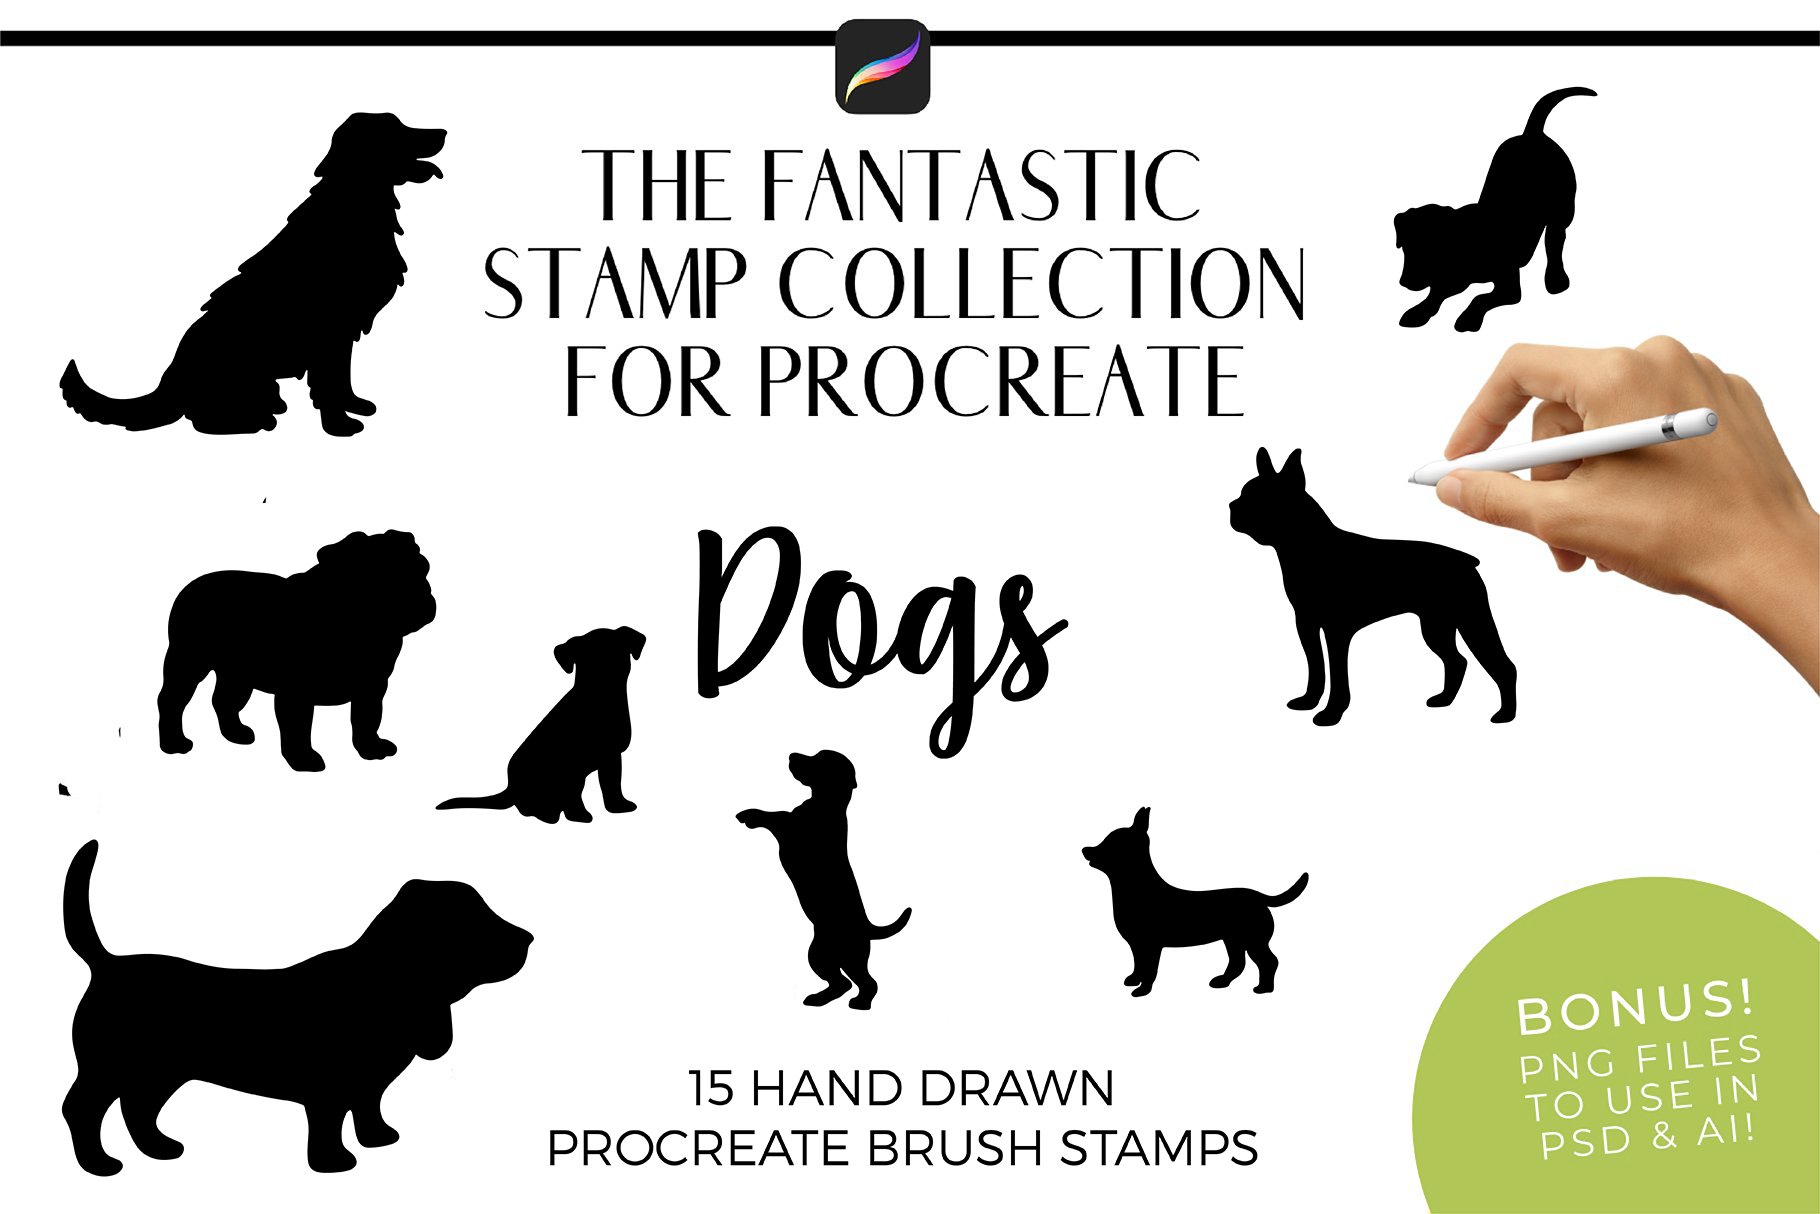 Procreate Brush Stamps - Dogscover image.